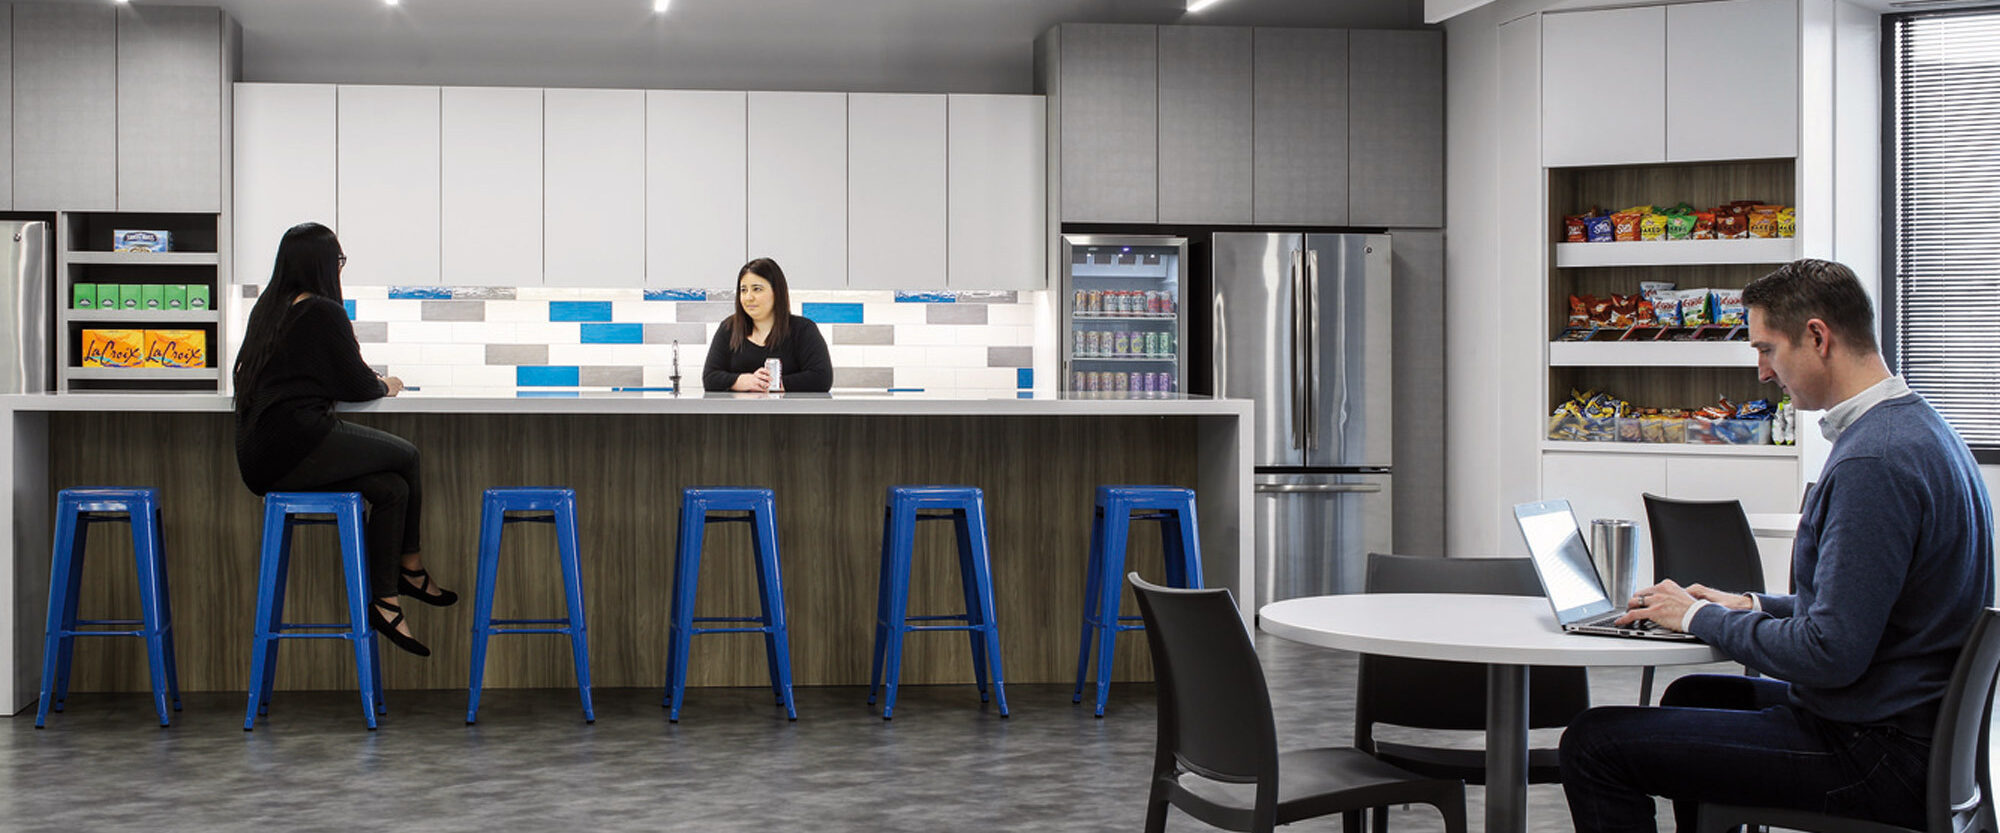 Modern office break room features a monochrome color palette with vibrant blue bar stools, providing a pop of color. Integrated lighting accentuates the textured tile backsplash. Employees engage around the functional kitchenette and workspace, fostering a collaborative environment.